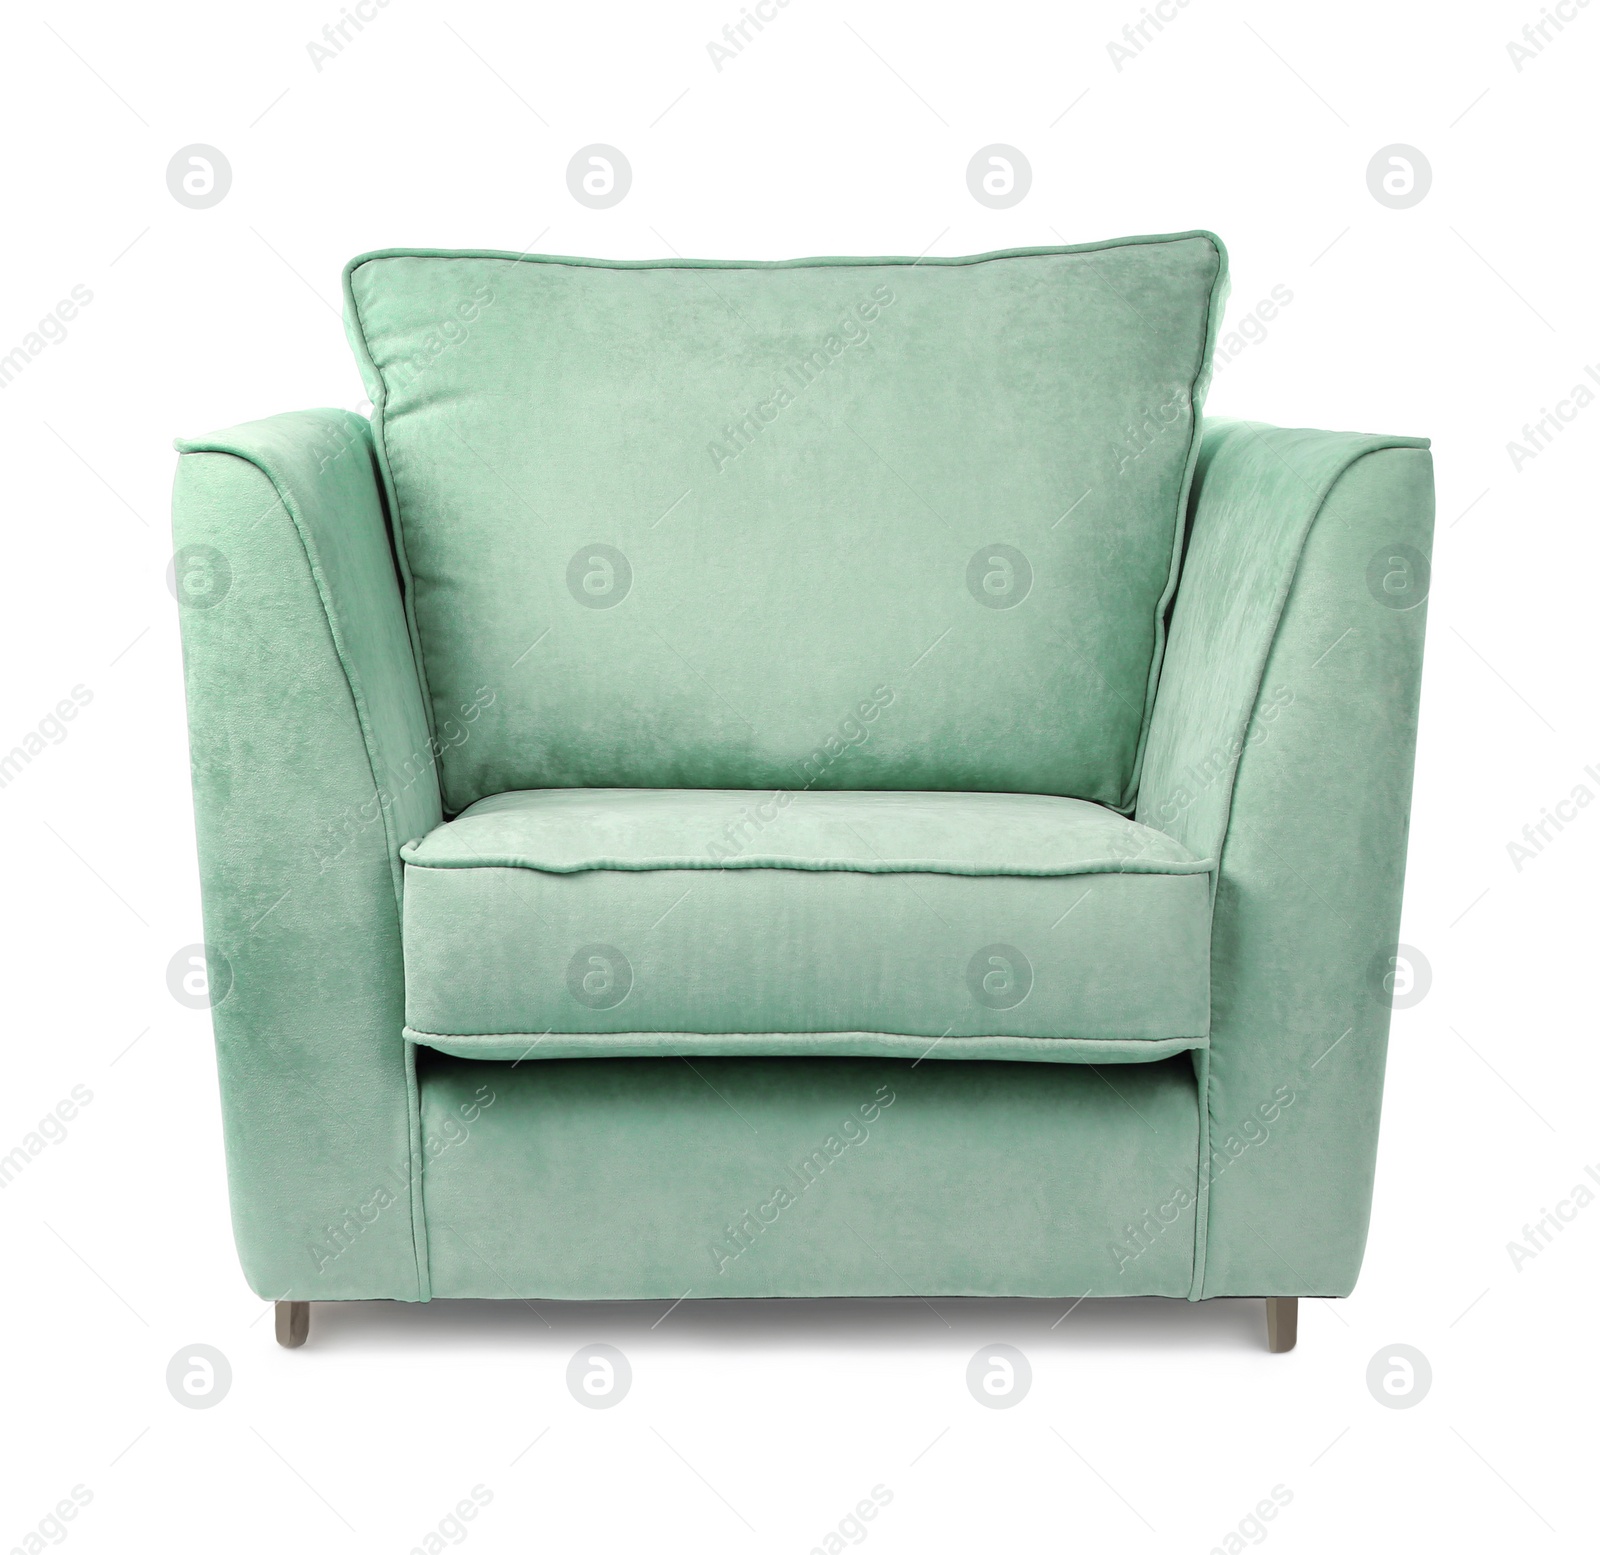 Image of One comfortable celadon color armchair isolated on white